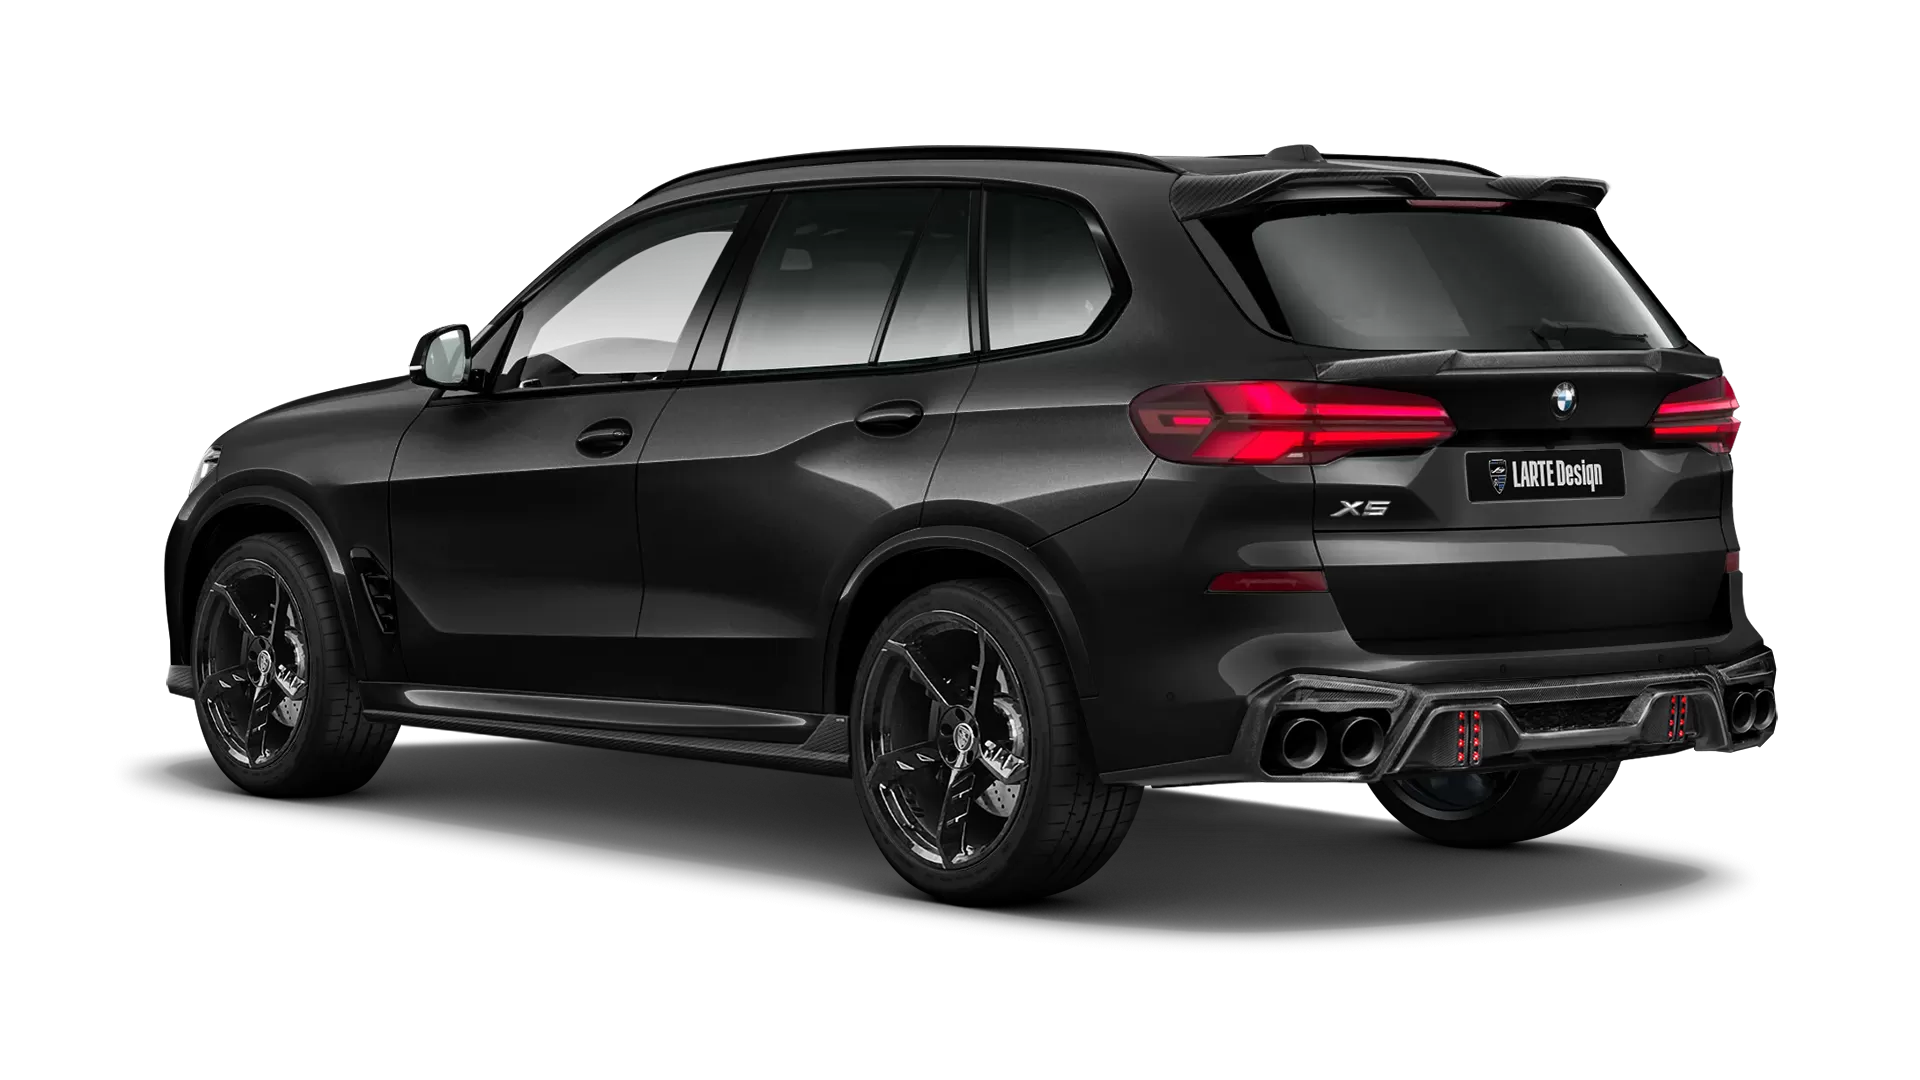 BMW X5 G05 LCI Facelift with carbon body kit: back view shown in Sapphire Black